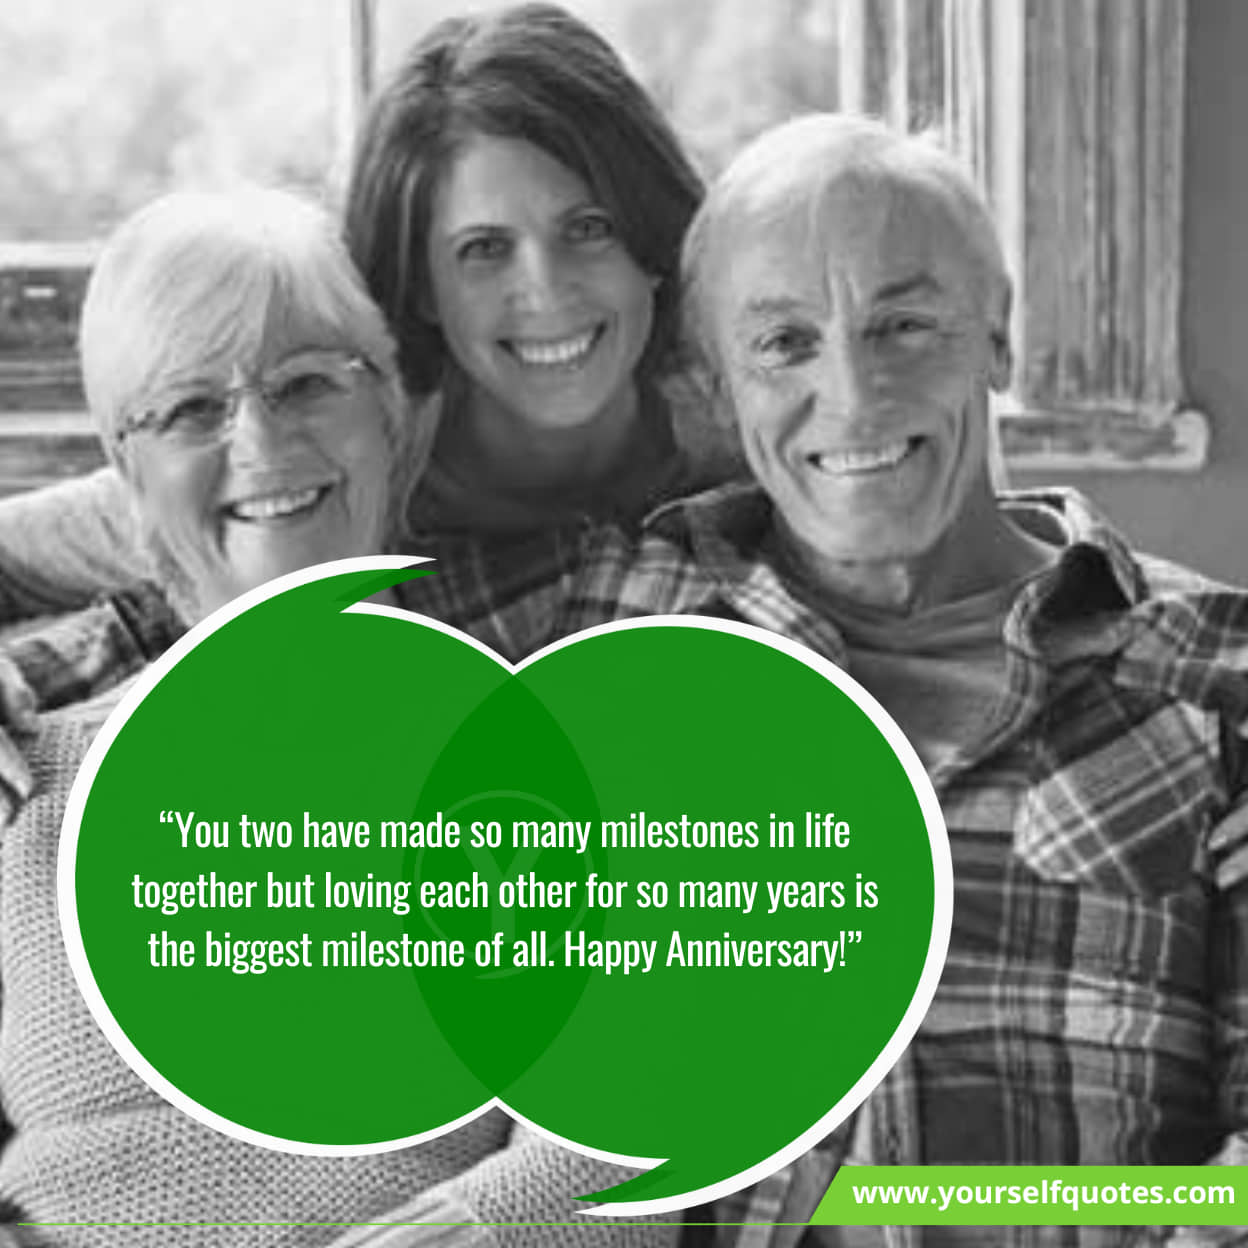 Happy Anniversary Wishes for a Lifetime of Happiness